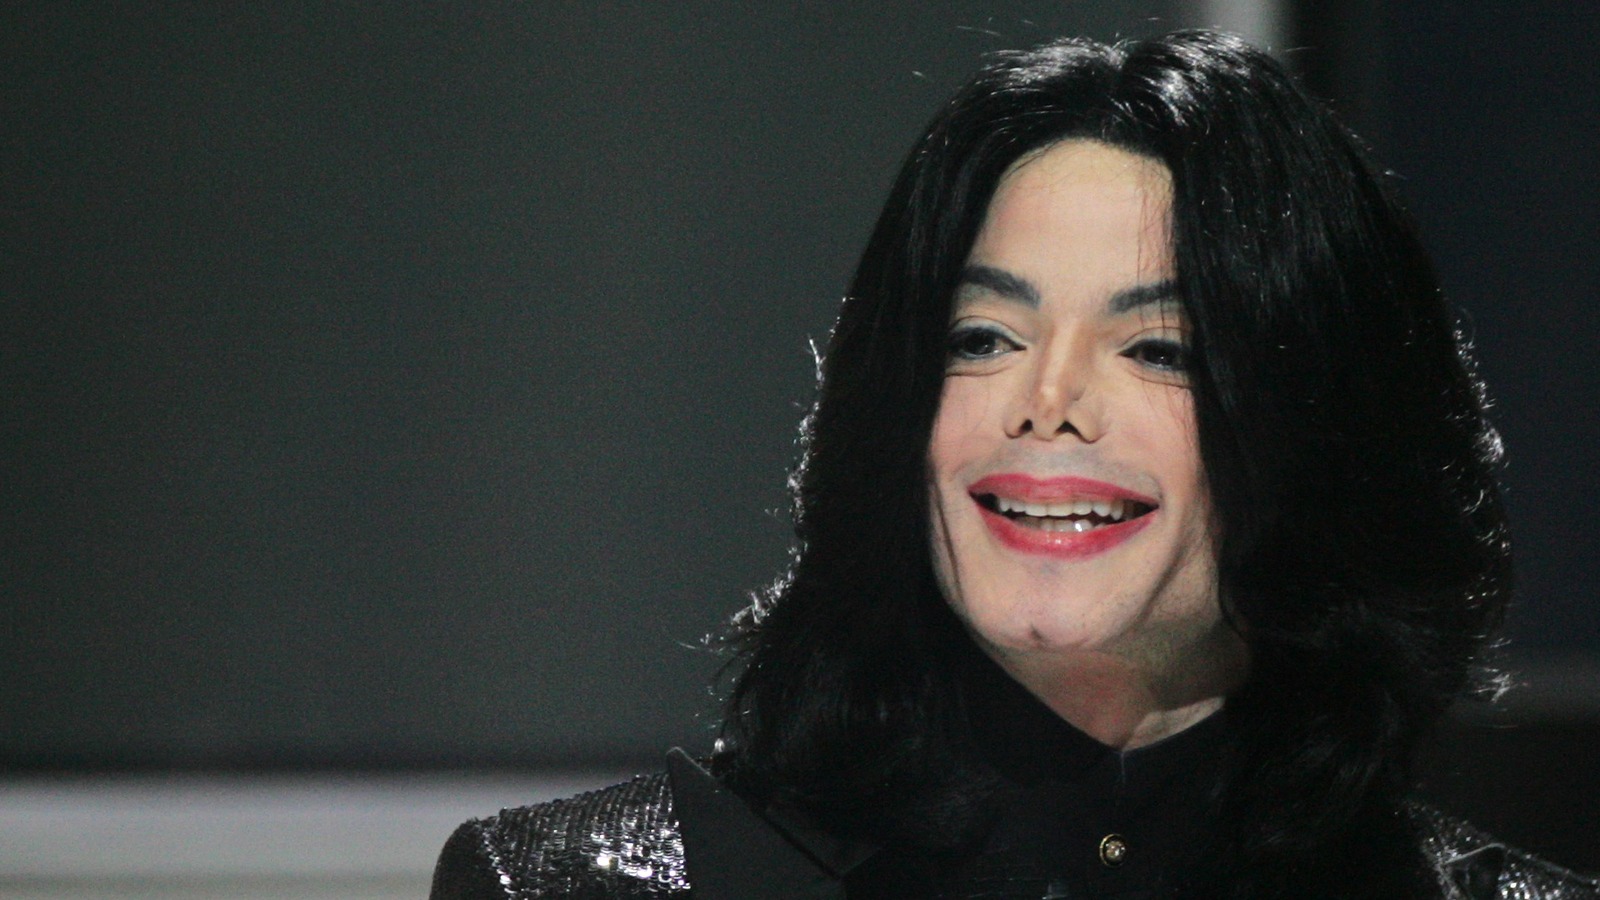 The Reason Some Are Convinced Michael Jackson Is Still Alive